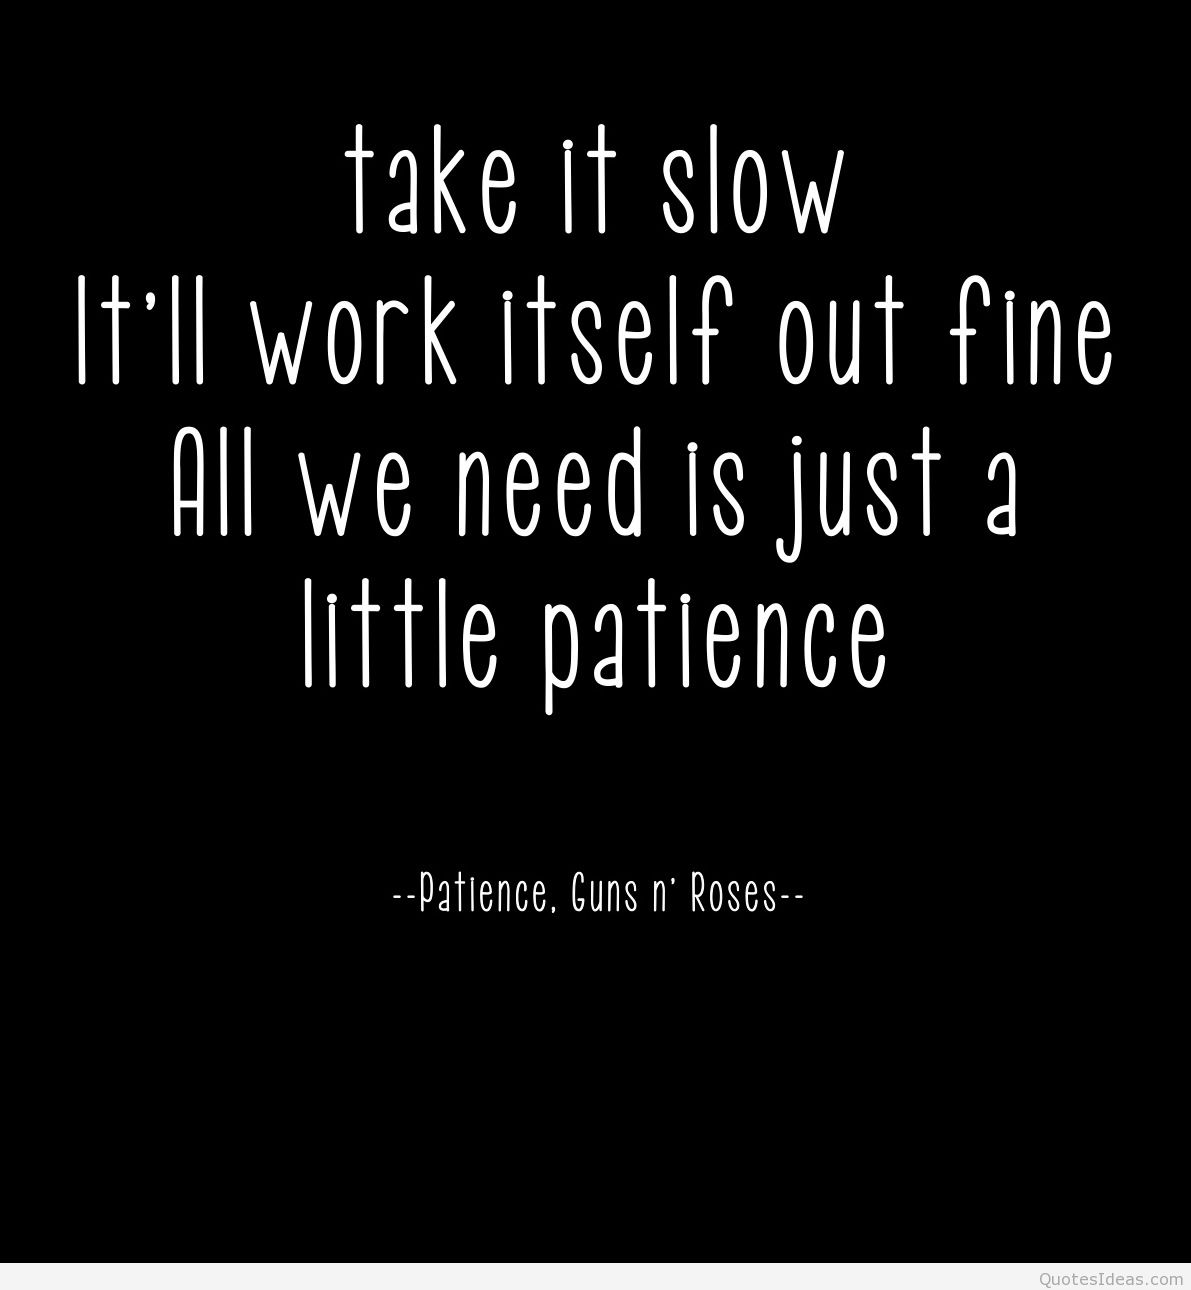 Take it slow. It'll work itself out fine. All we need is just a little patience